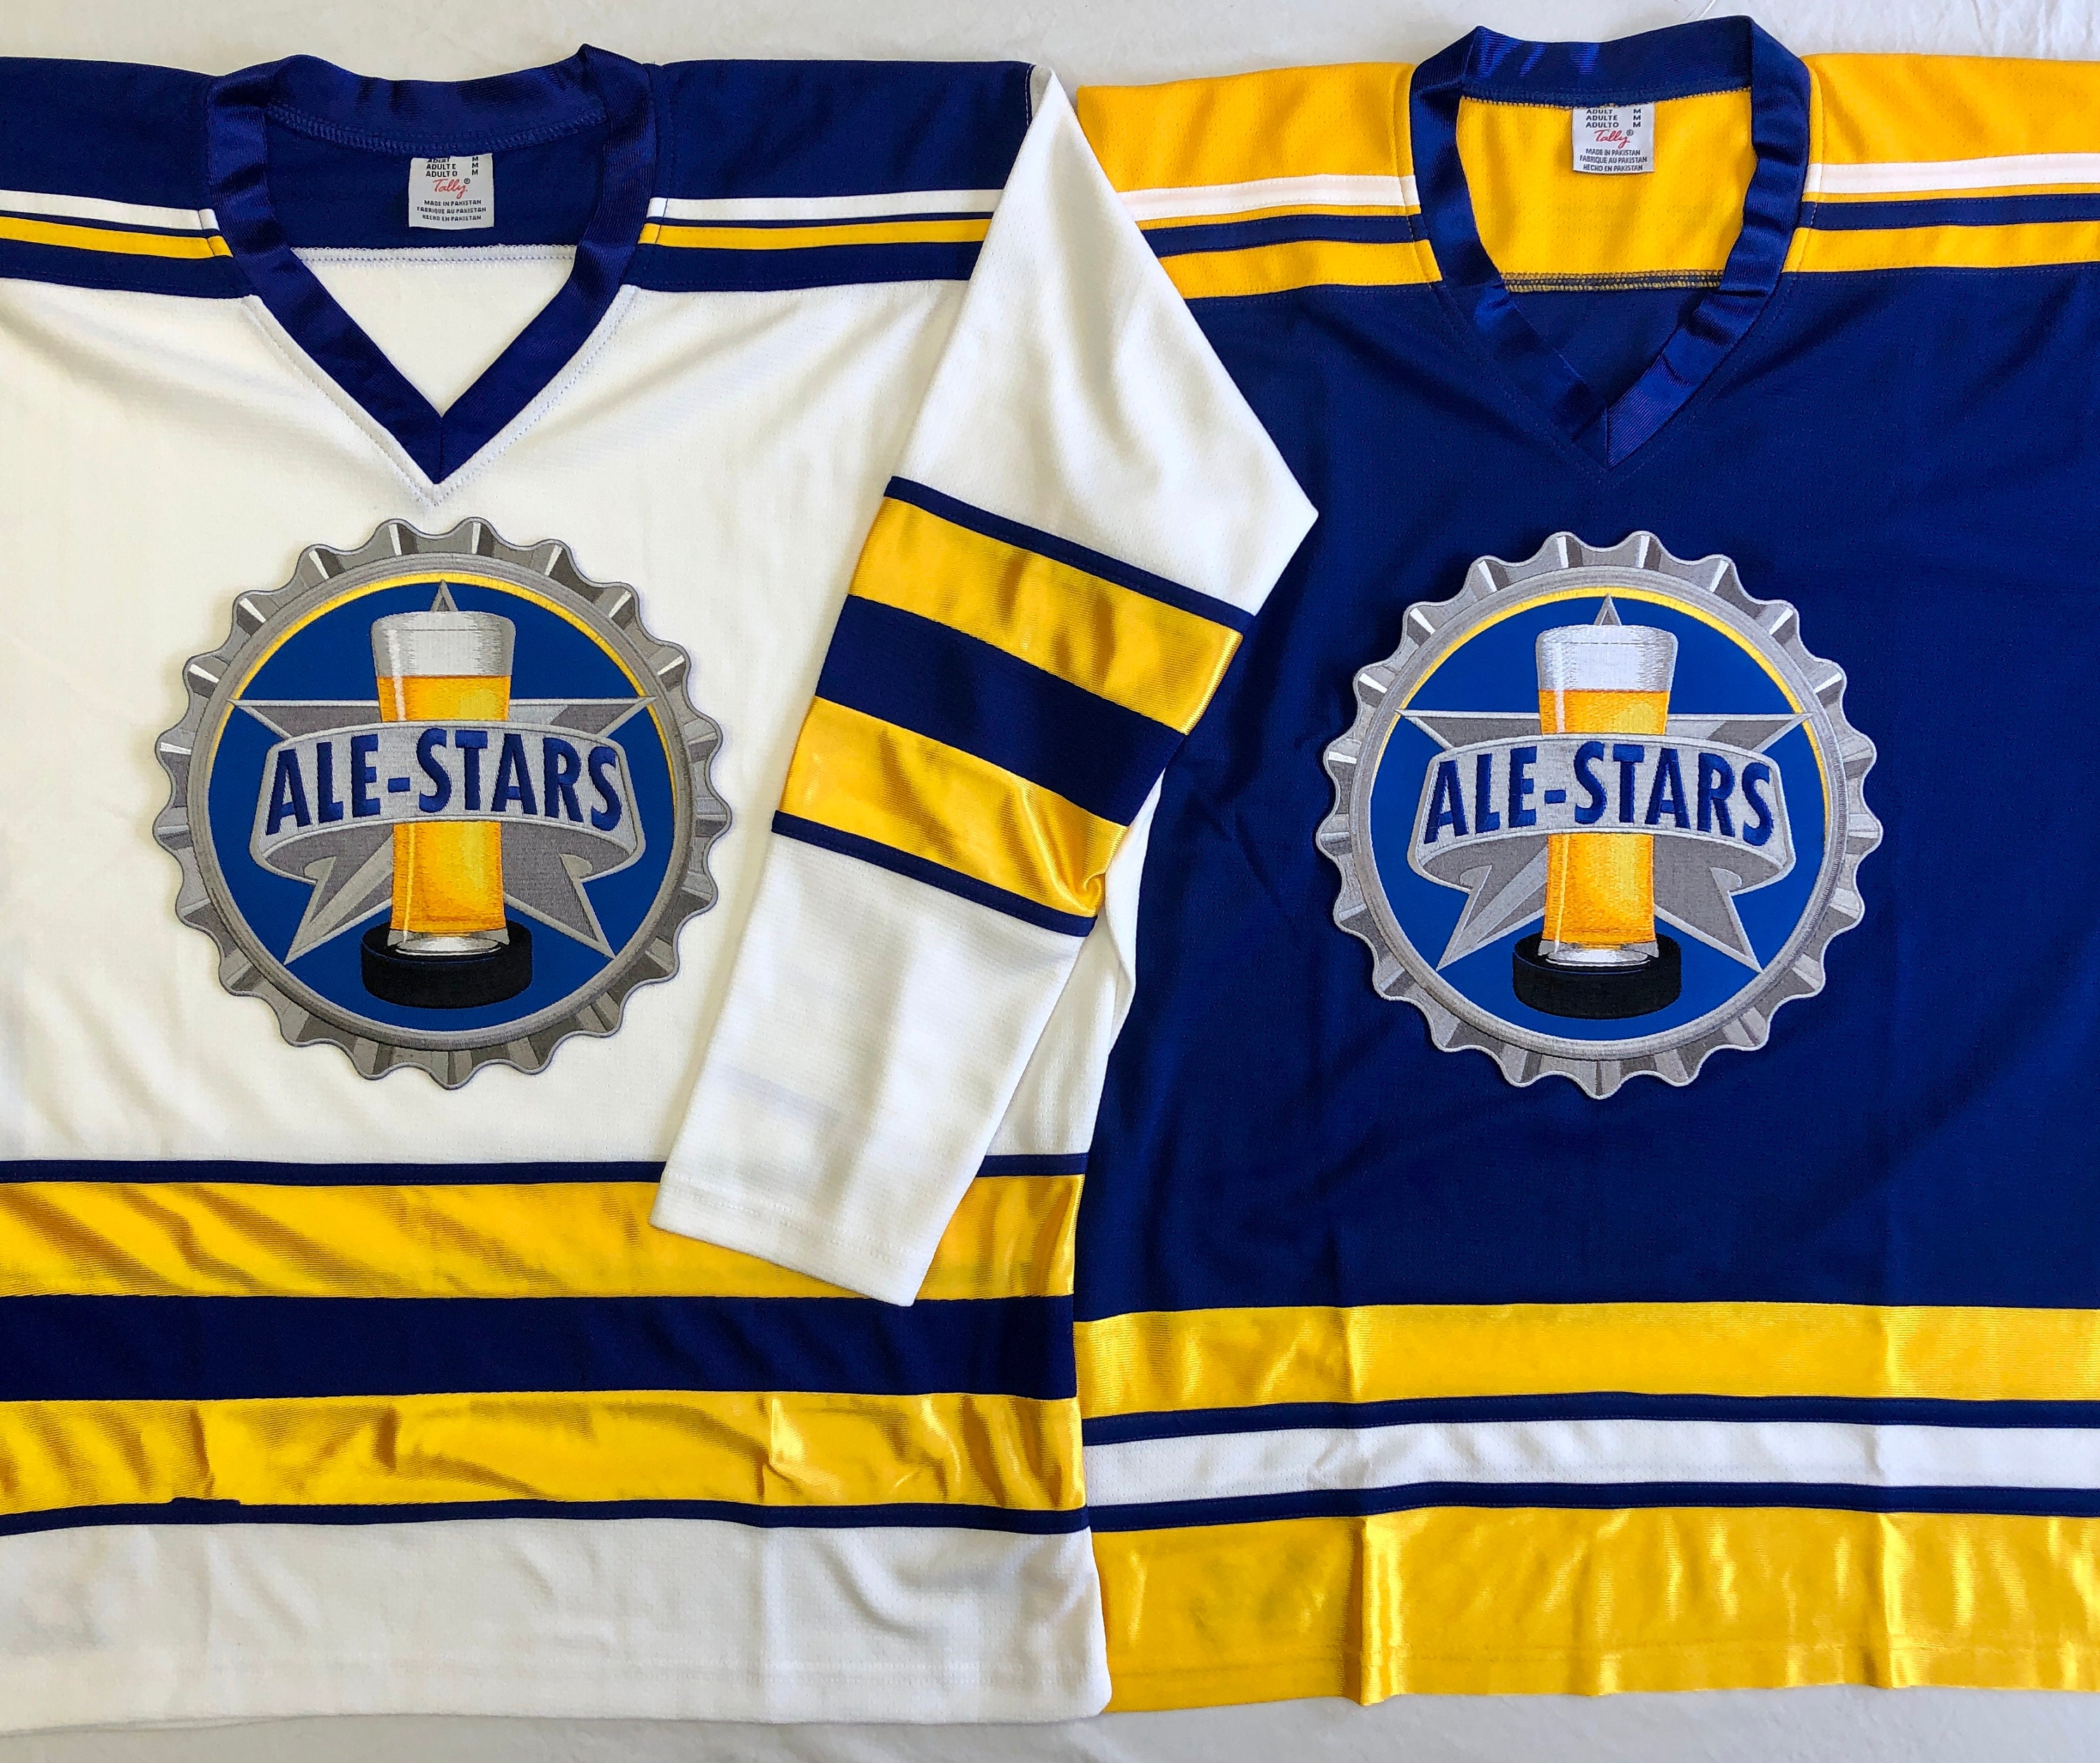 Custom Hockey Jerseys - Solid Body Alternating Waist and Sleeve Stripes - Team Name, Player Name and Numbers on Sleeves - Team Designation